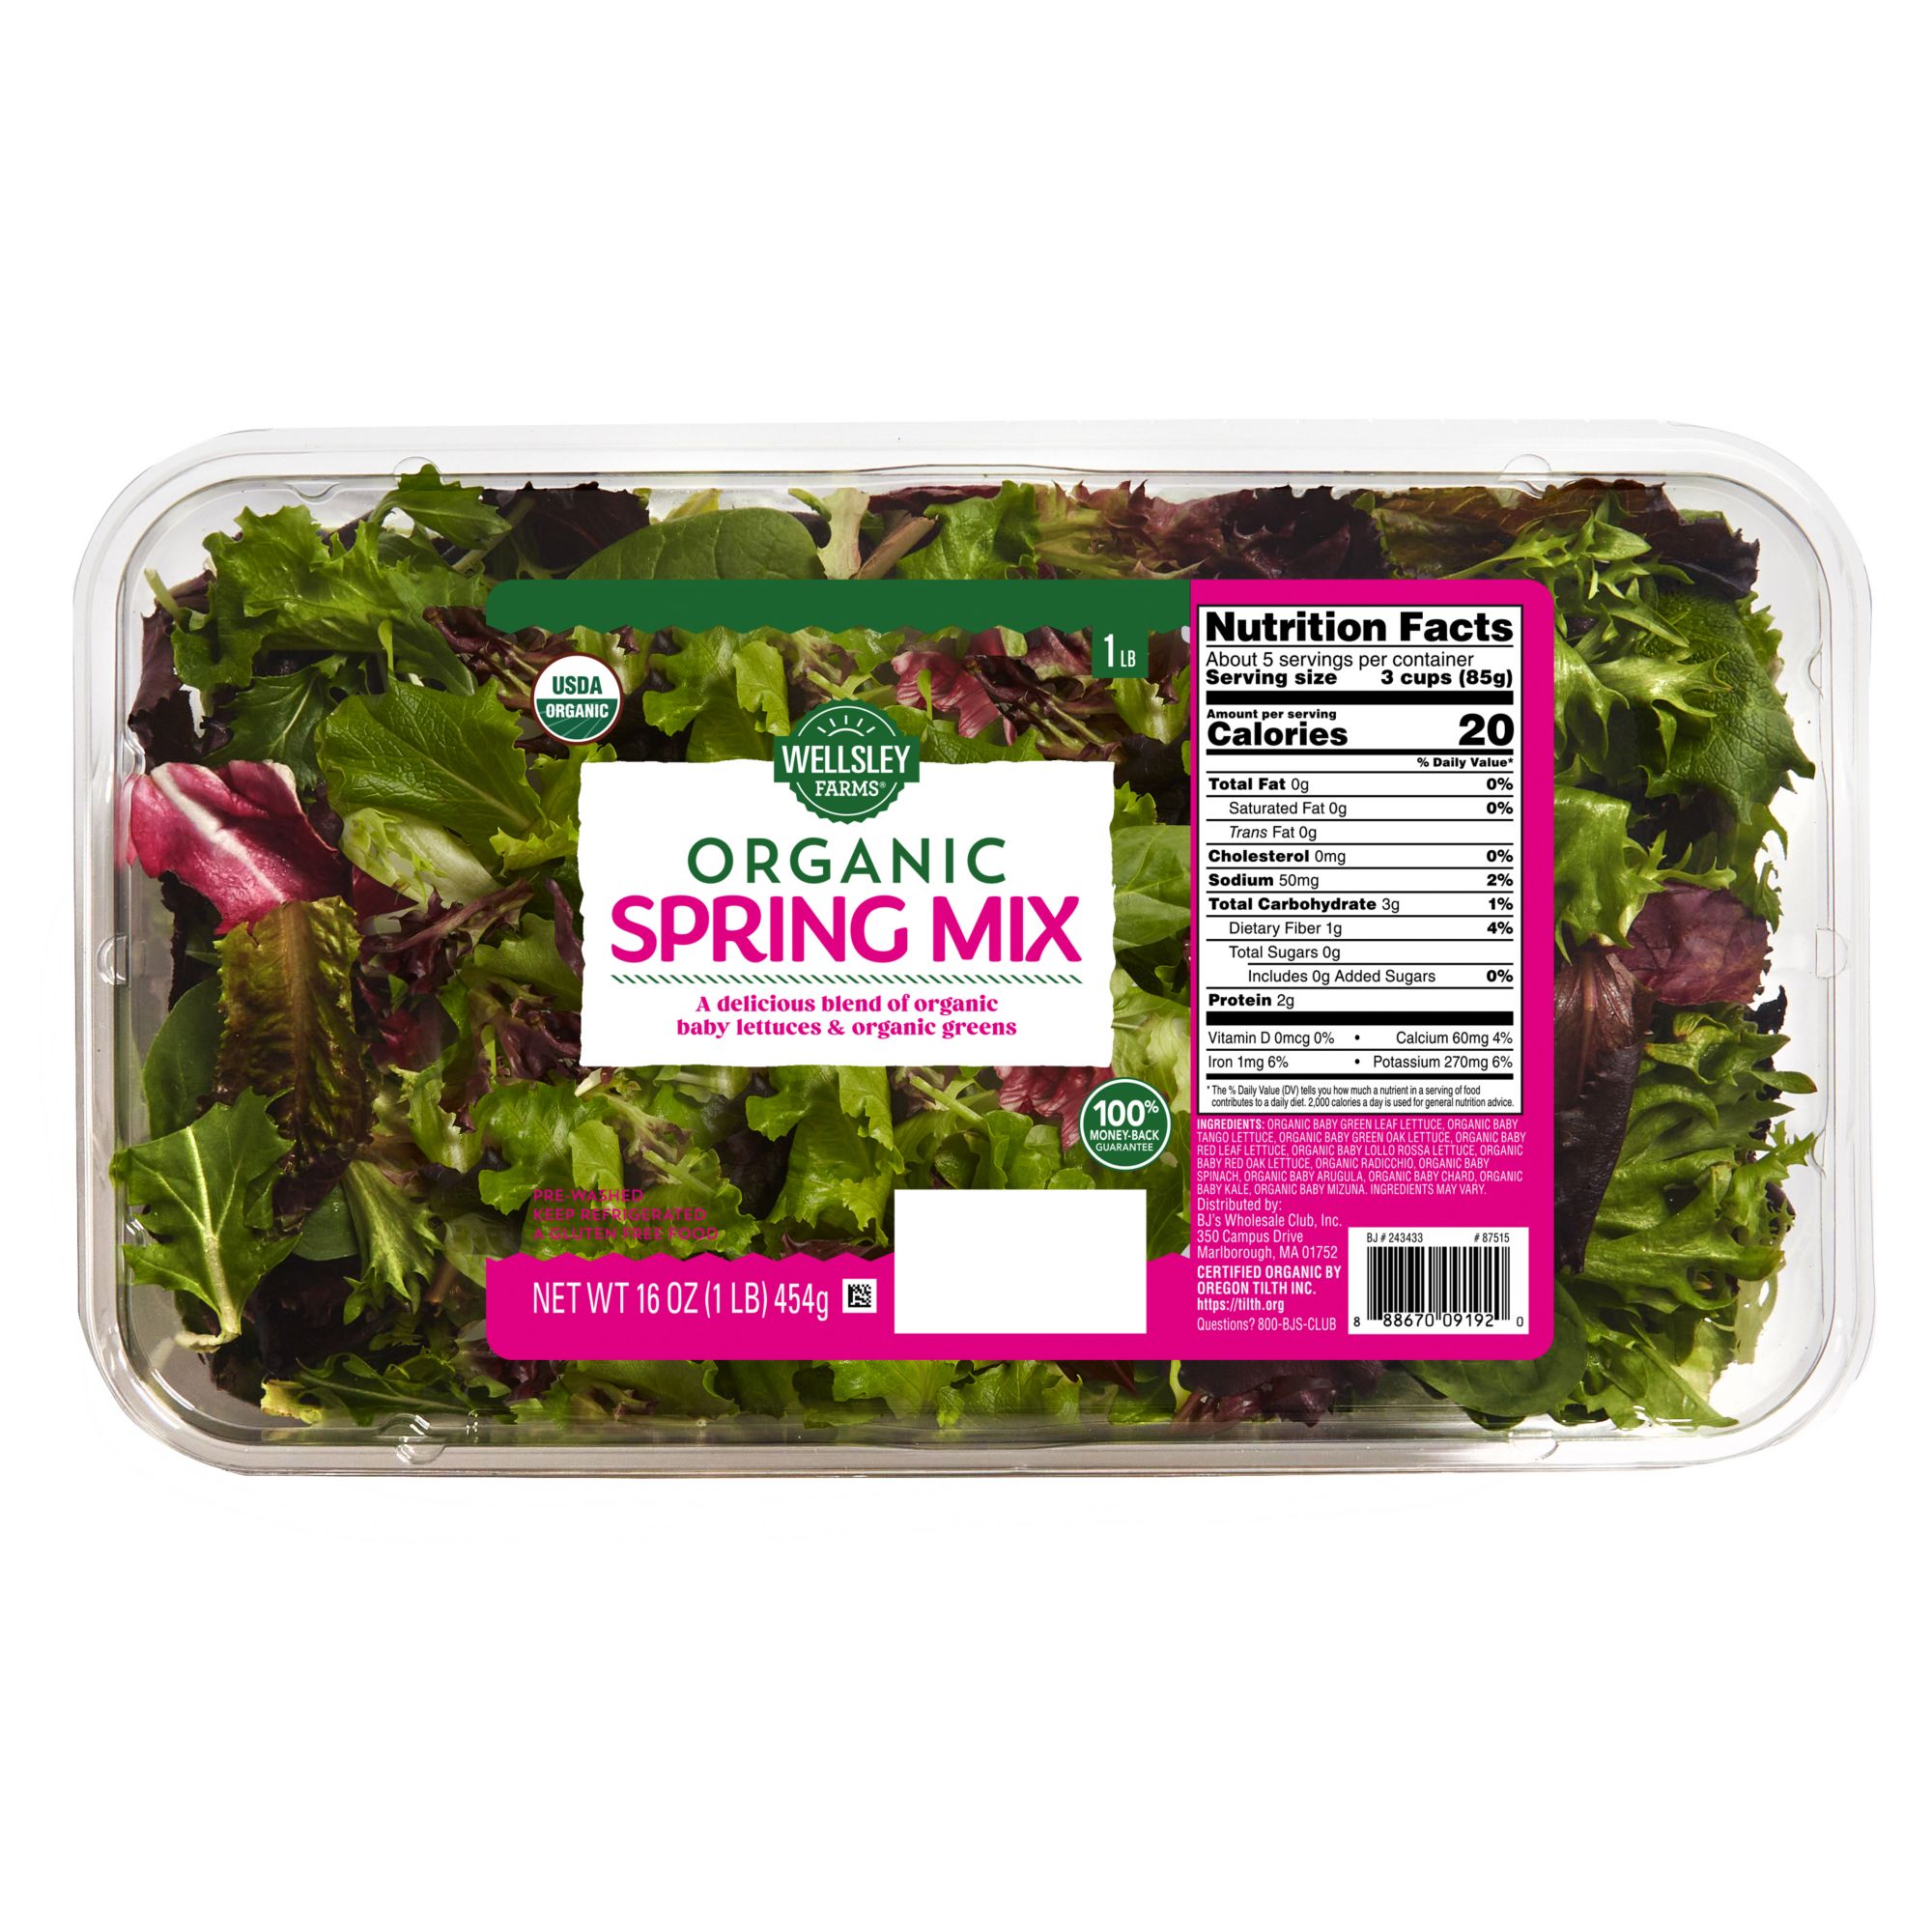 Spring Mix Lettuce Information  Learn About Spring Mix Lettuce